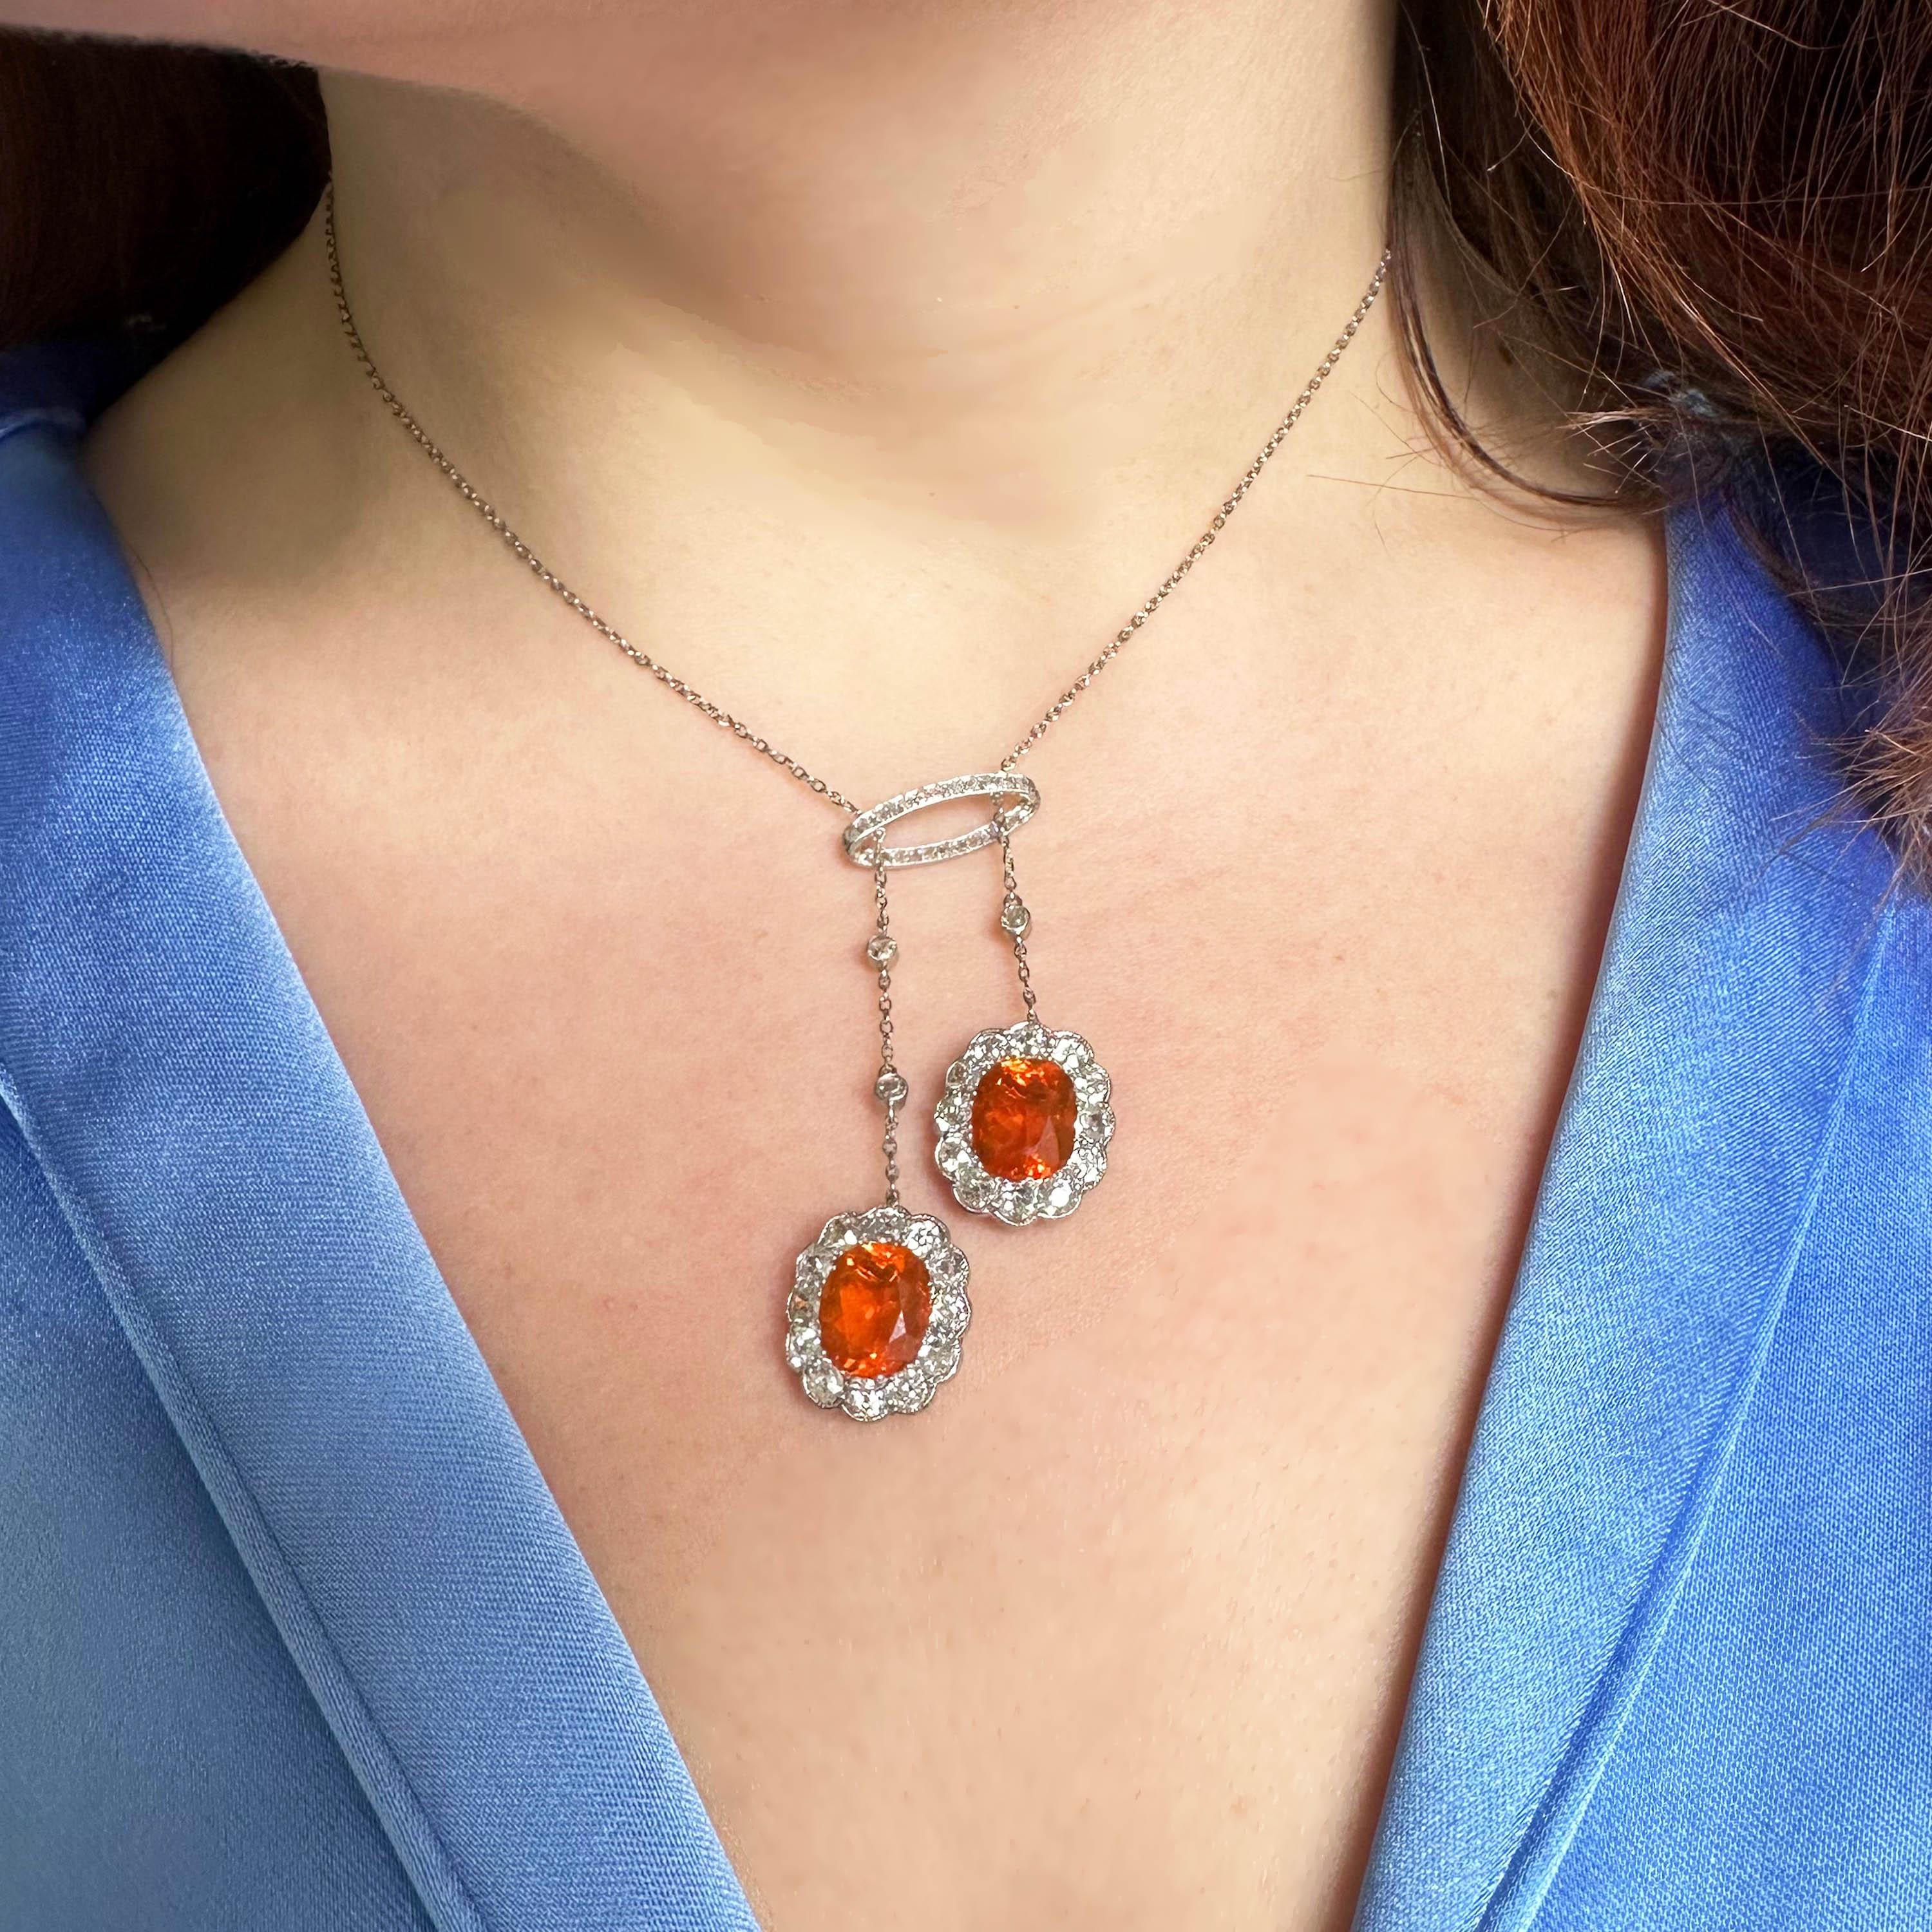 A Garrards fire opal and diamond drop earrings and negligee pendant set. The earrings have old European-cut diamond tops, in rub over settings, with four articulating, graduating rows of old European and rose-cut diamond set foliate motifs, in grain